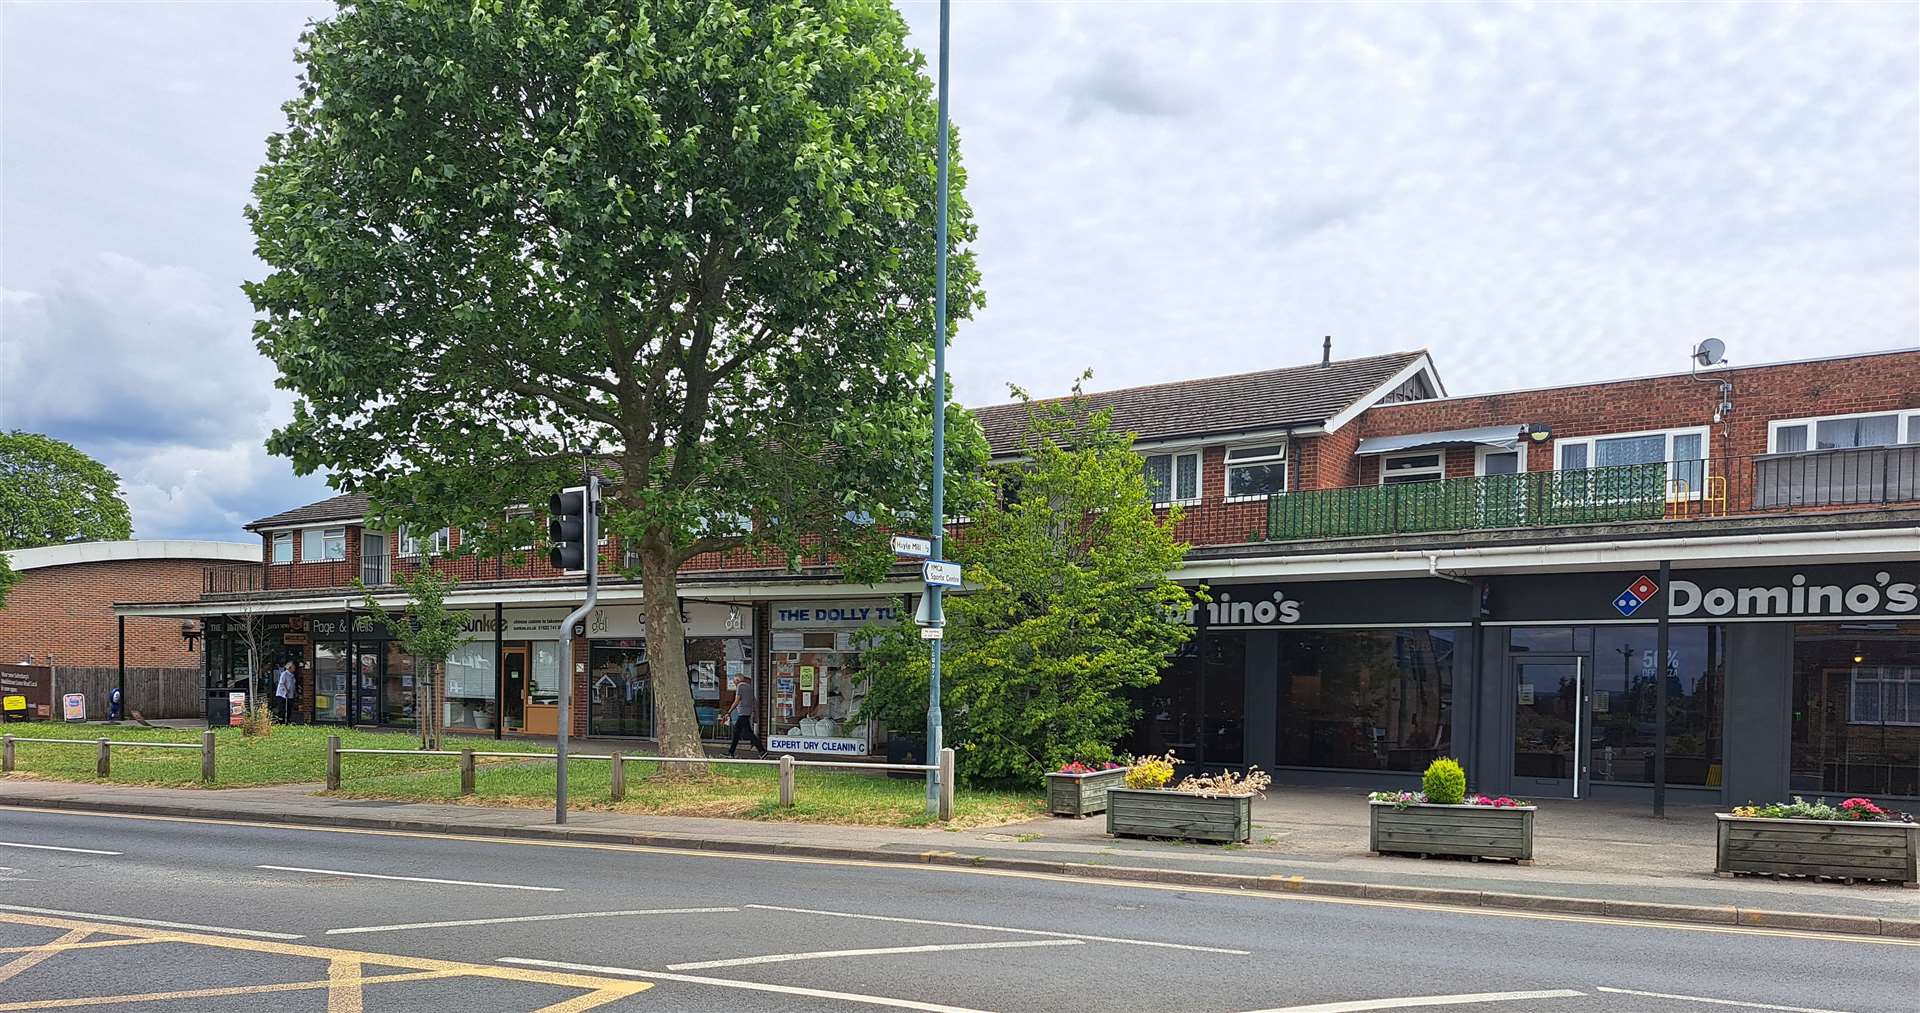 The Boughton Shopping Parade could find itself in Loose